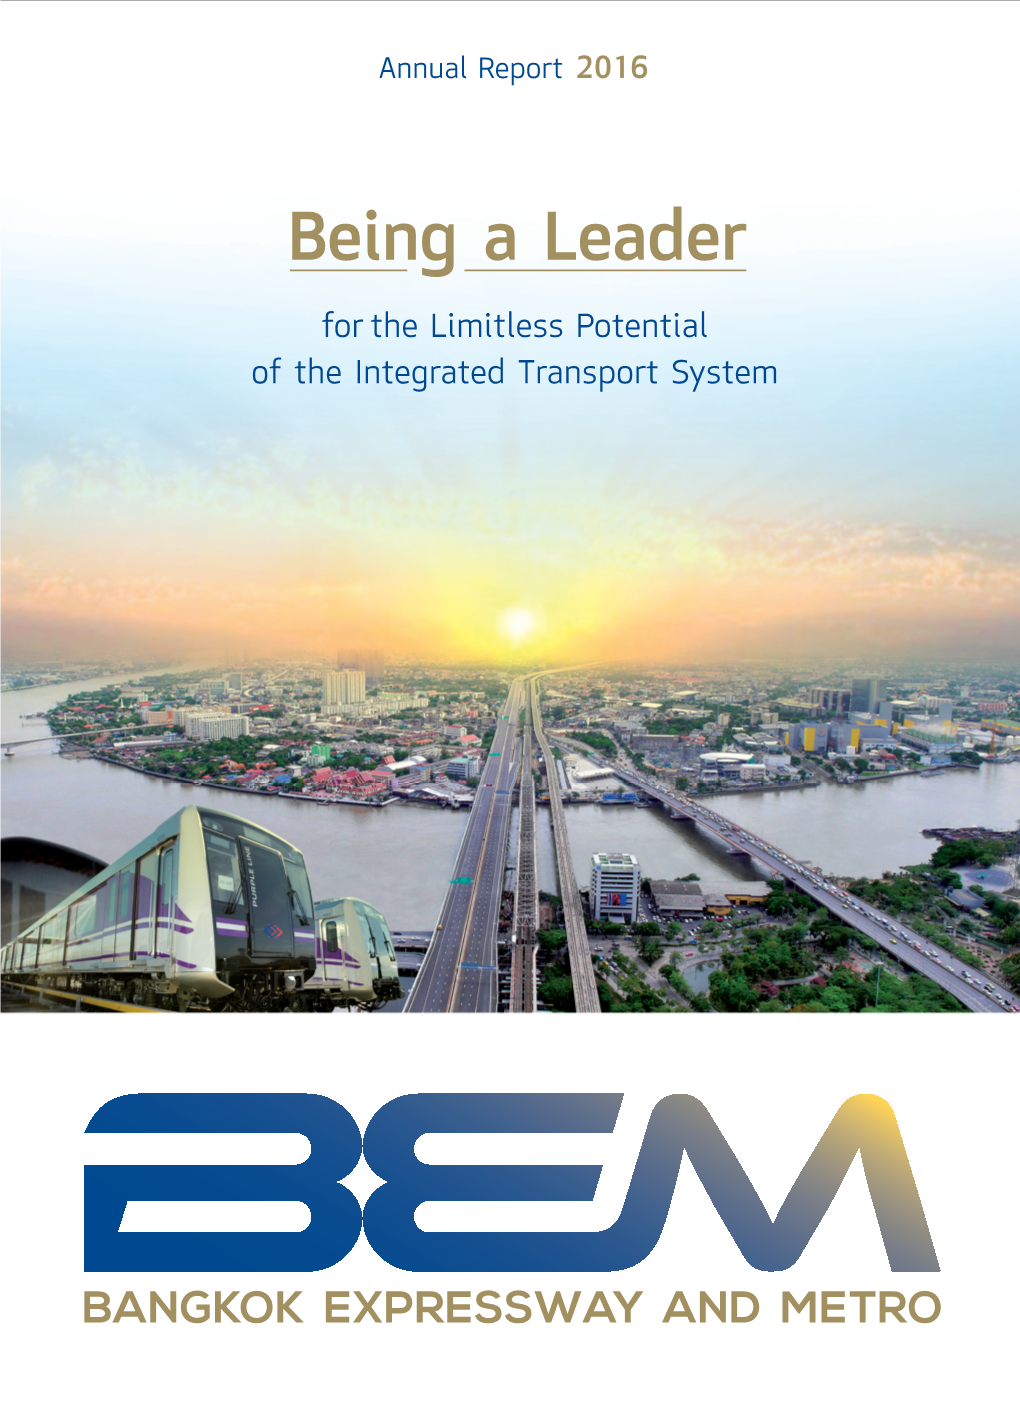 Being a Leader for the Limitless Potential of the Integrated Transport System